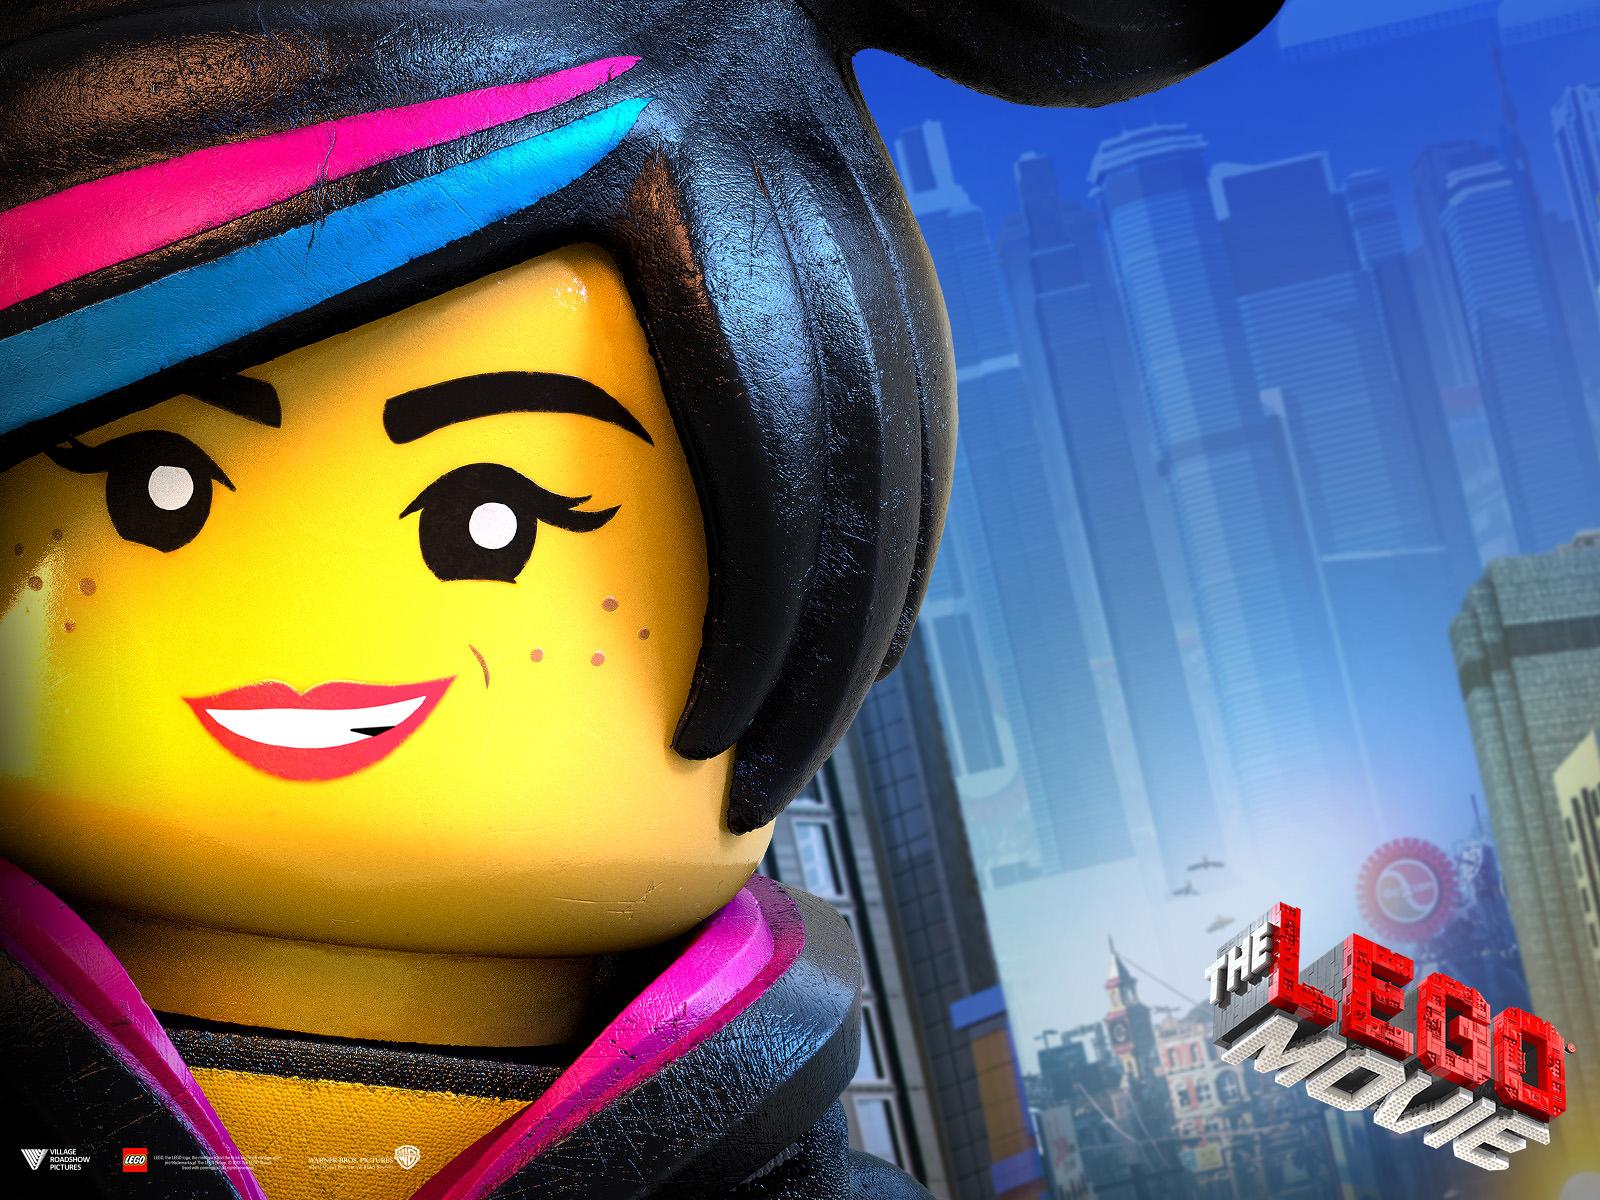 Free 2K The Lego Movie Wallpapers & Desk 4K Backgrounds